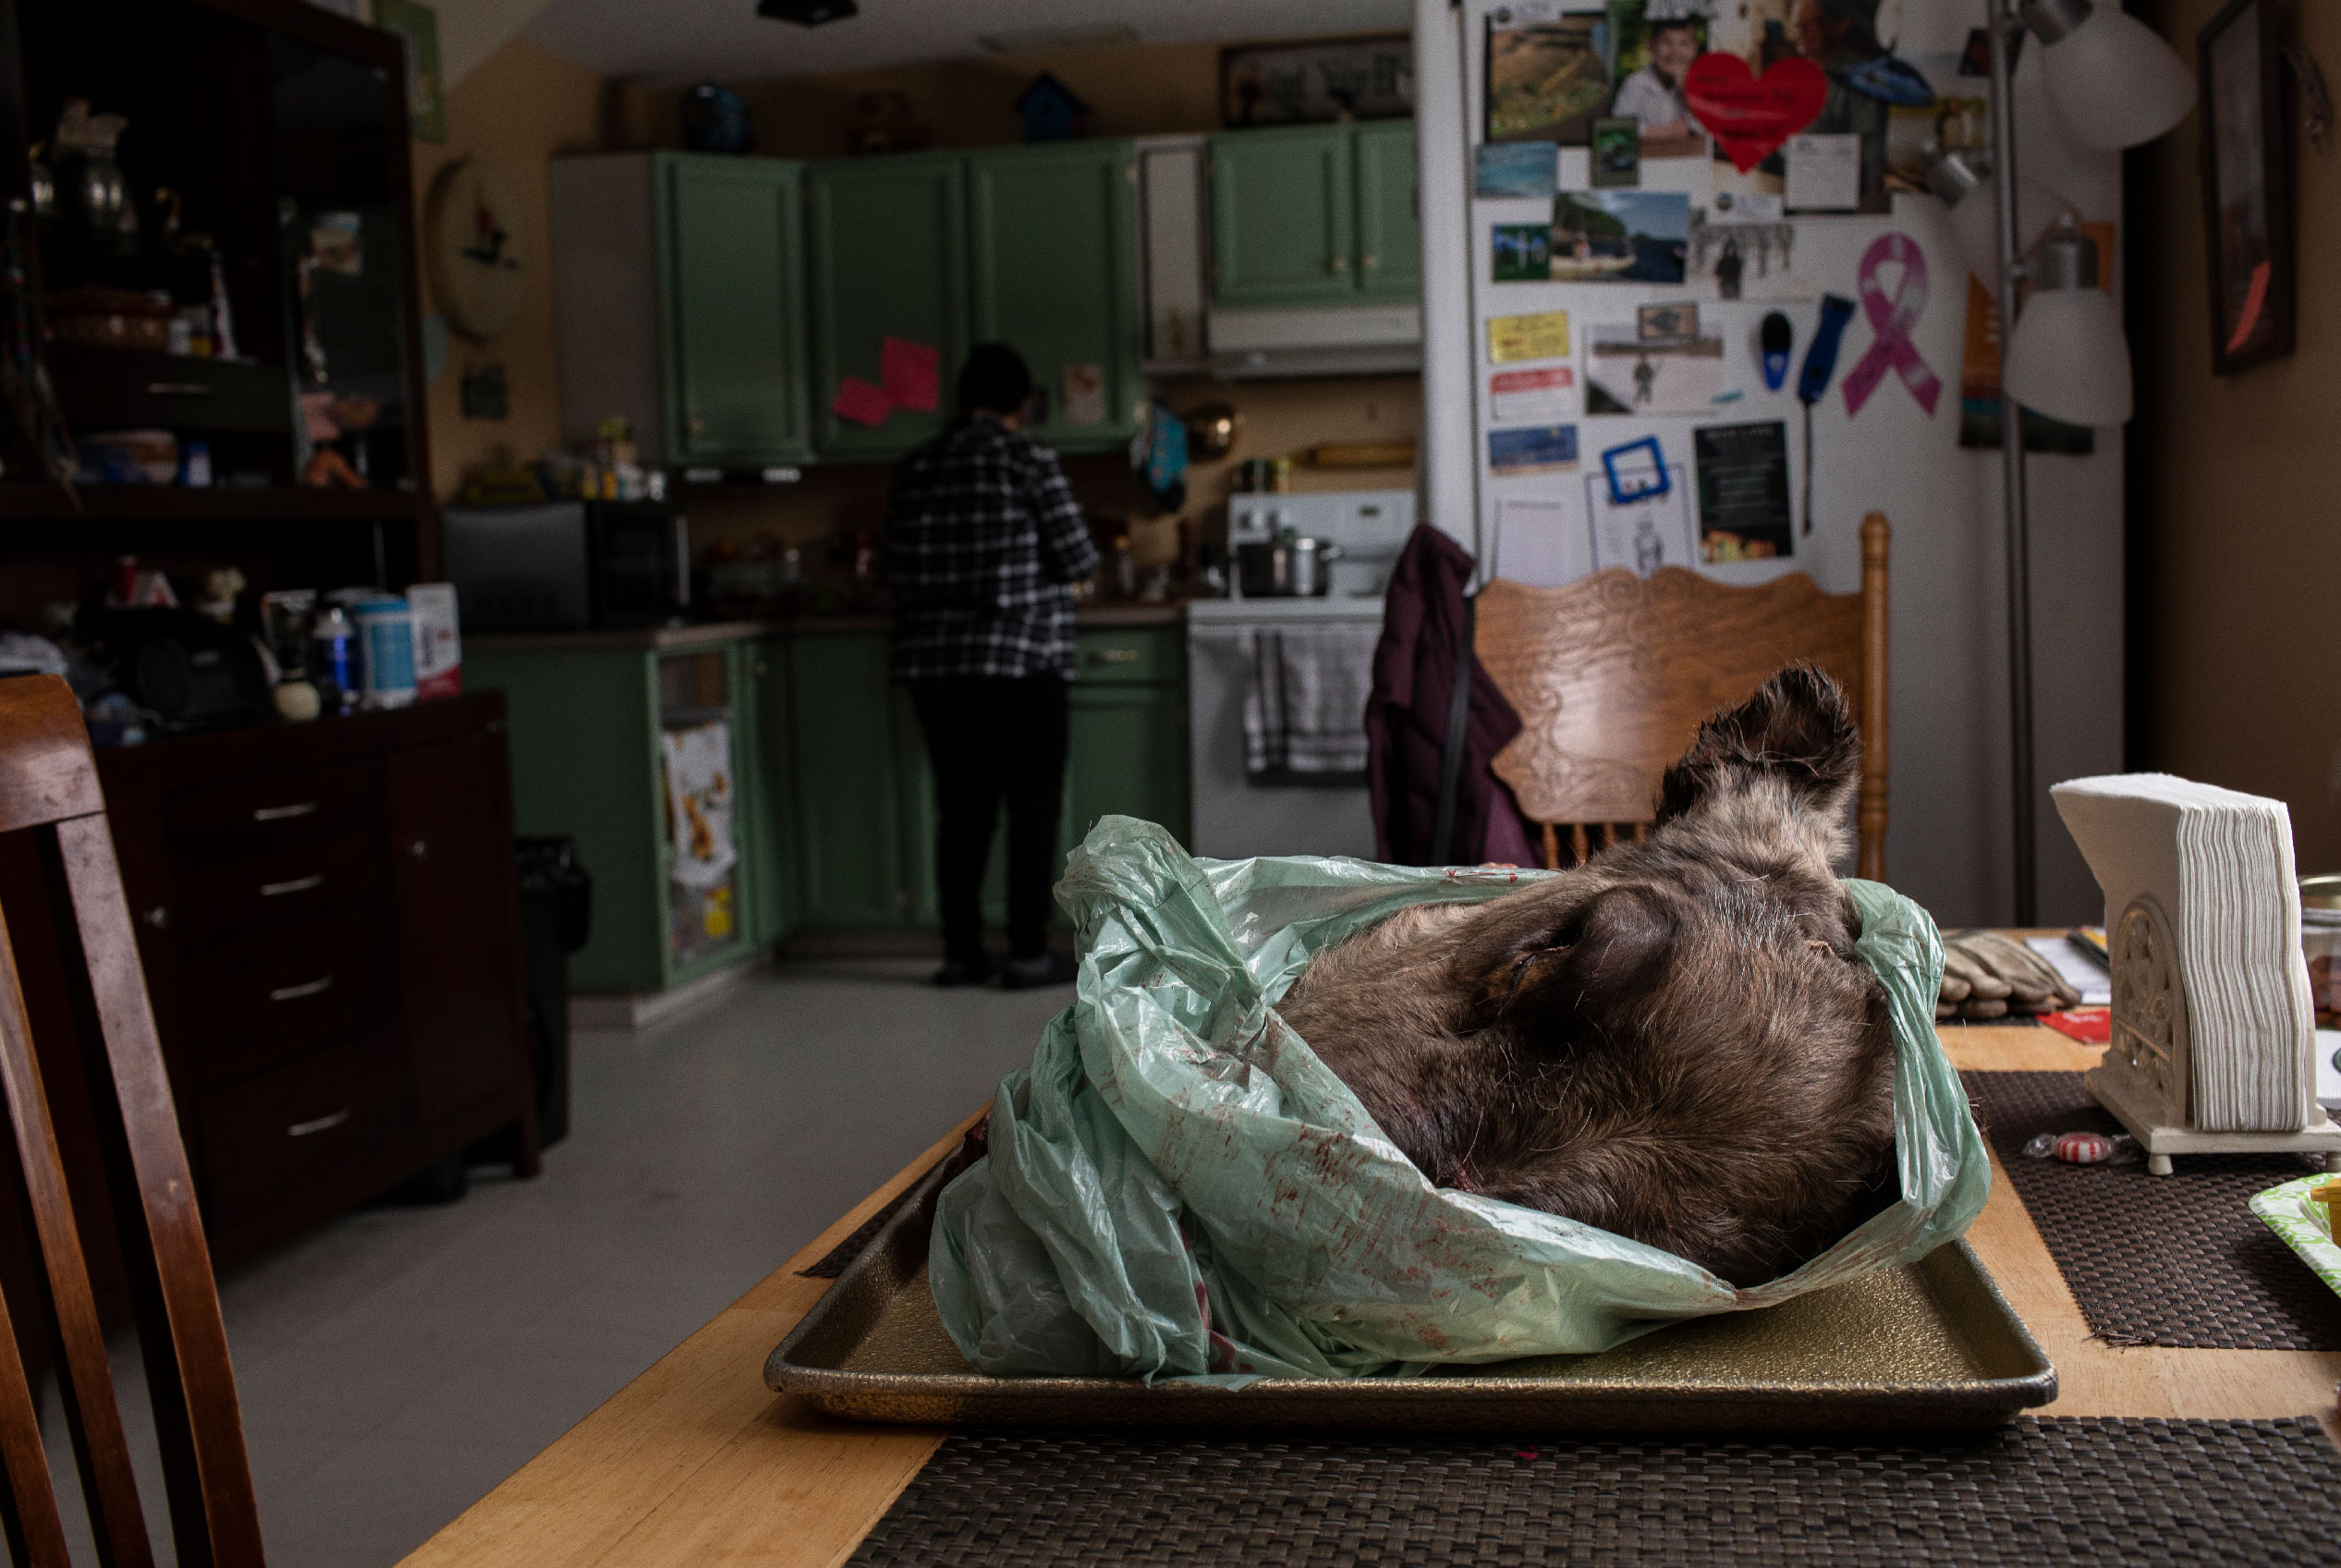 A caribou head sits in a green plastic bag on a kitchen table.